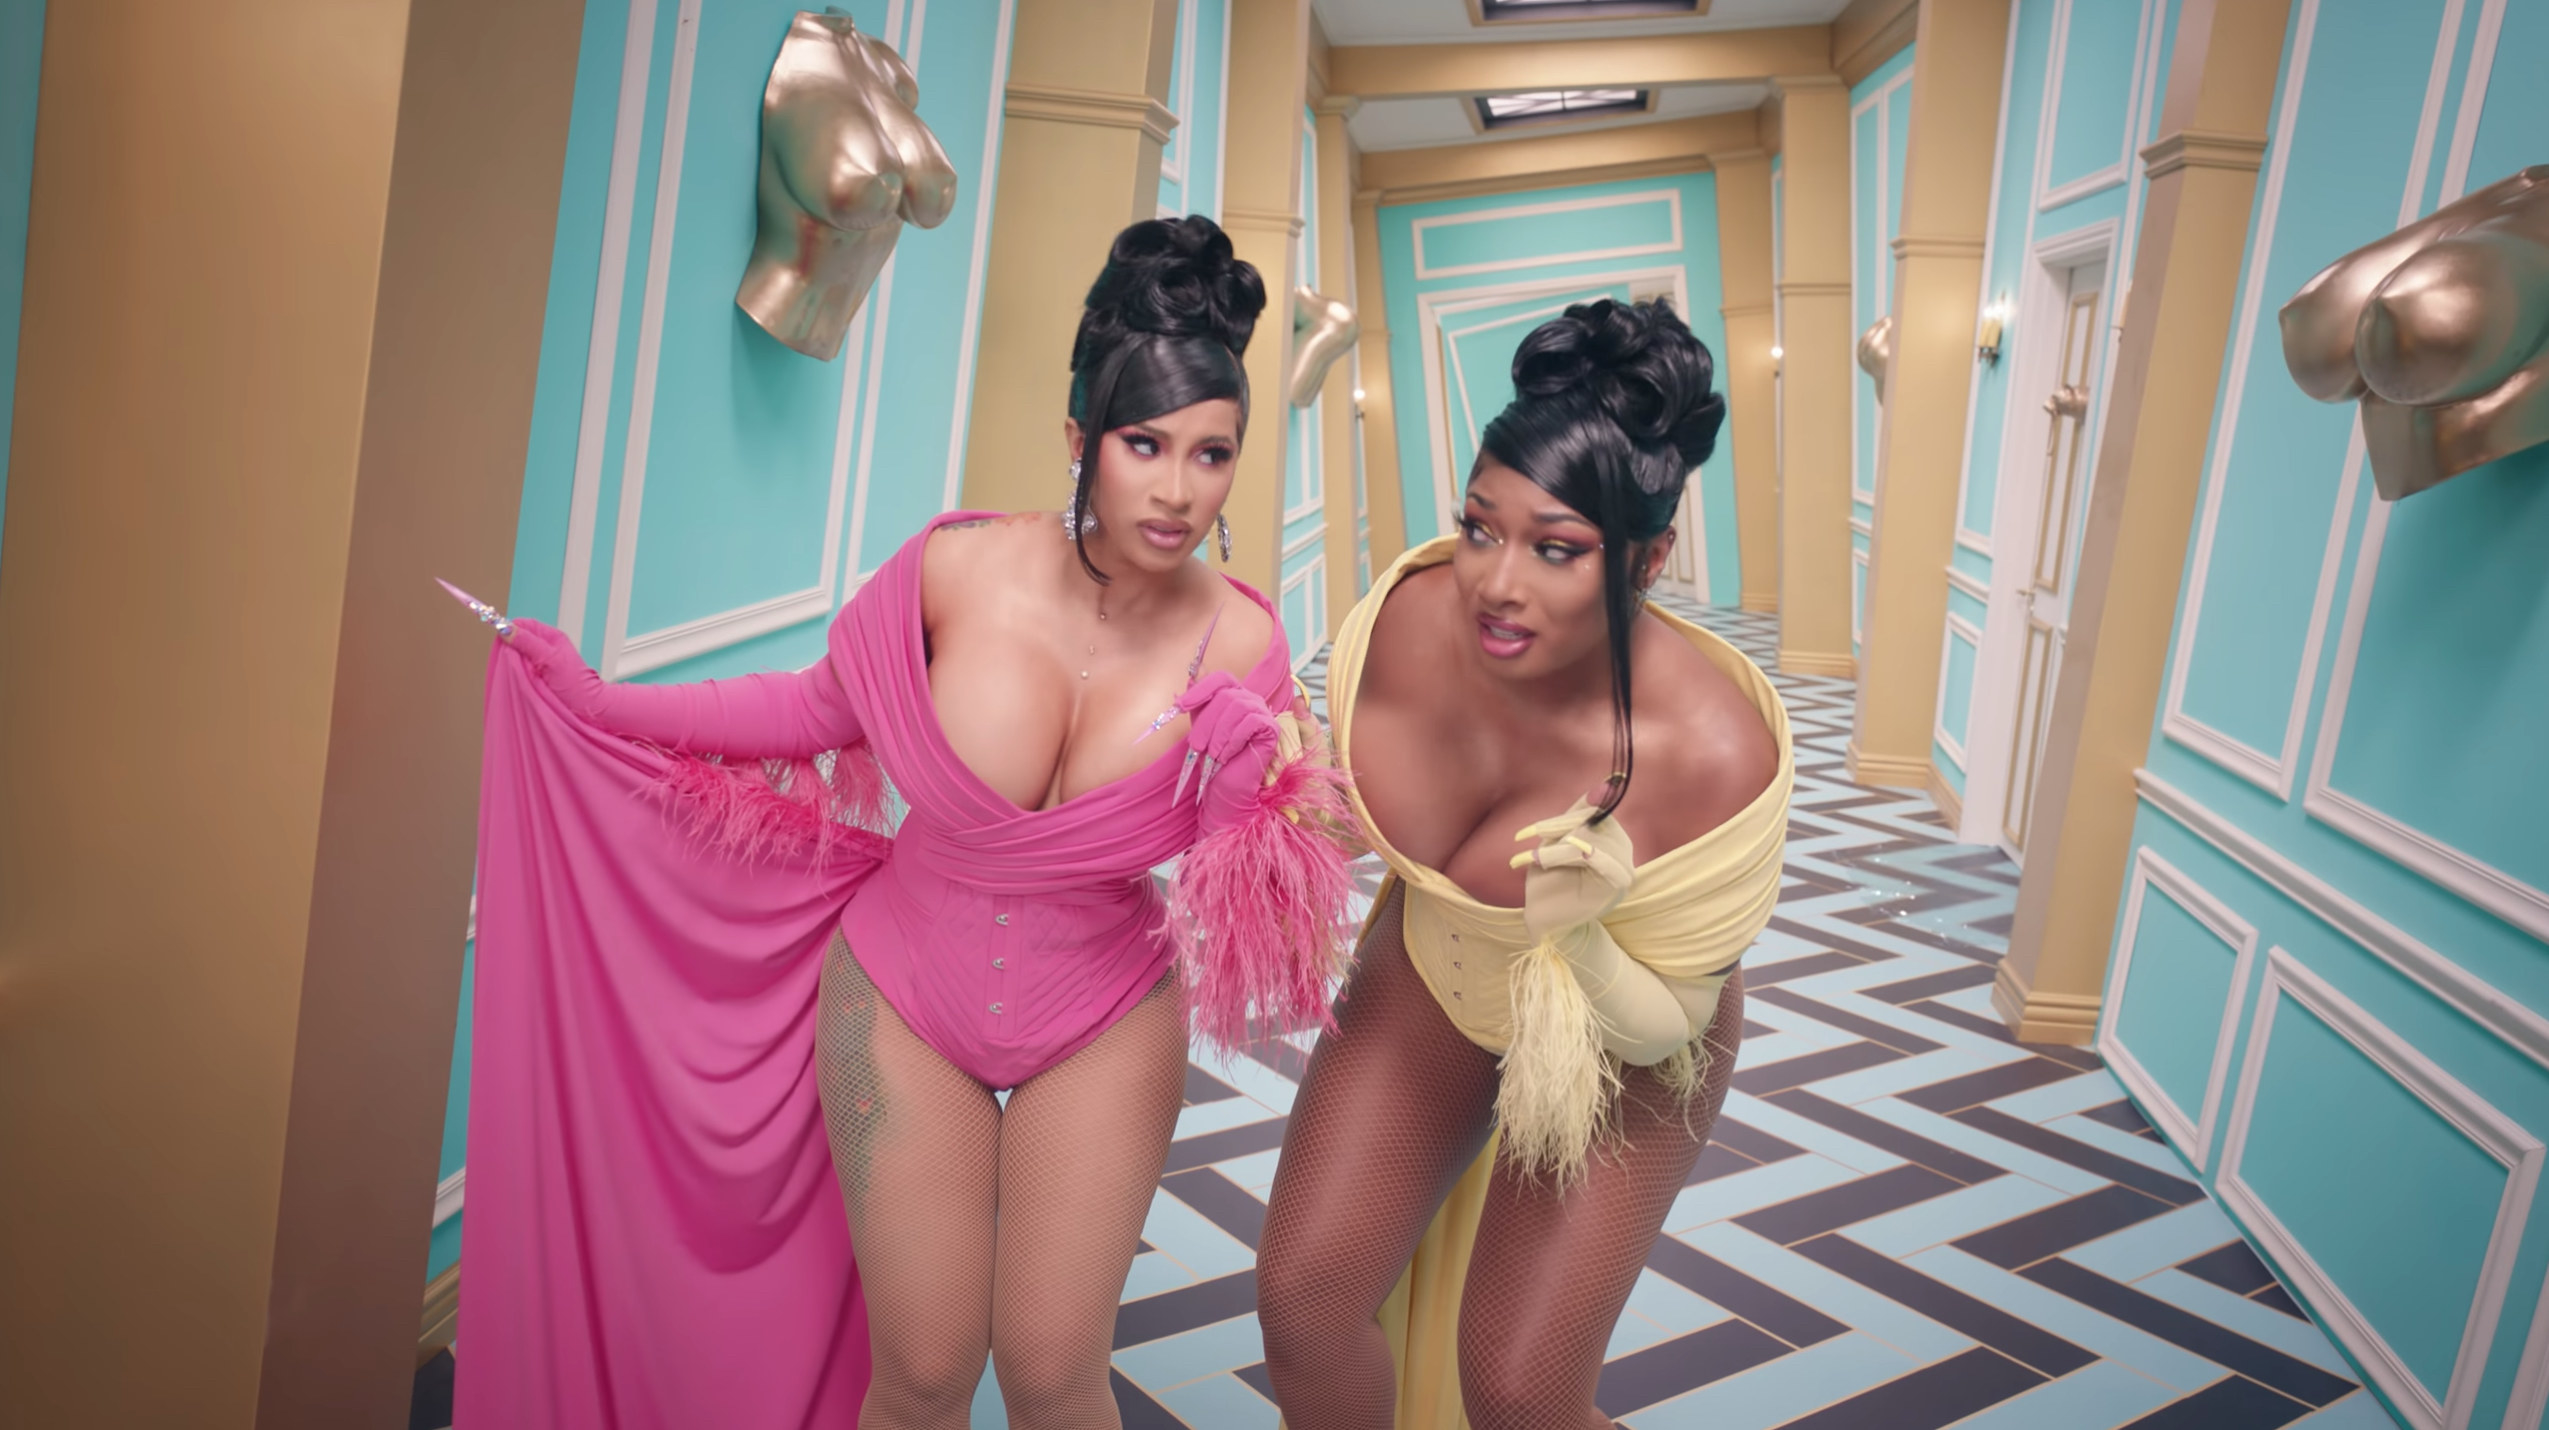 Cardi B and Megan Thee Stallion in the "WAP" video. 